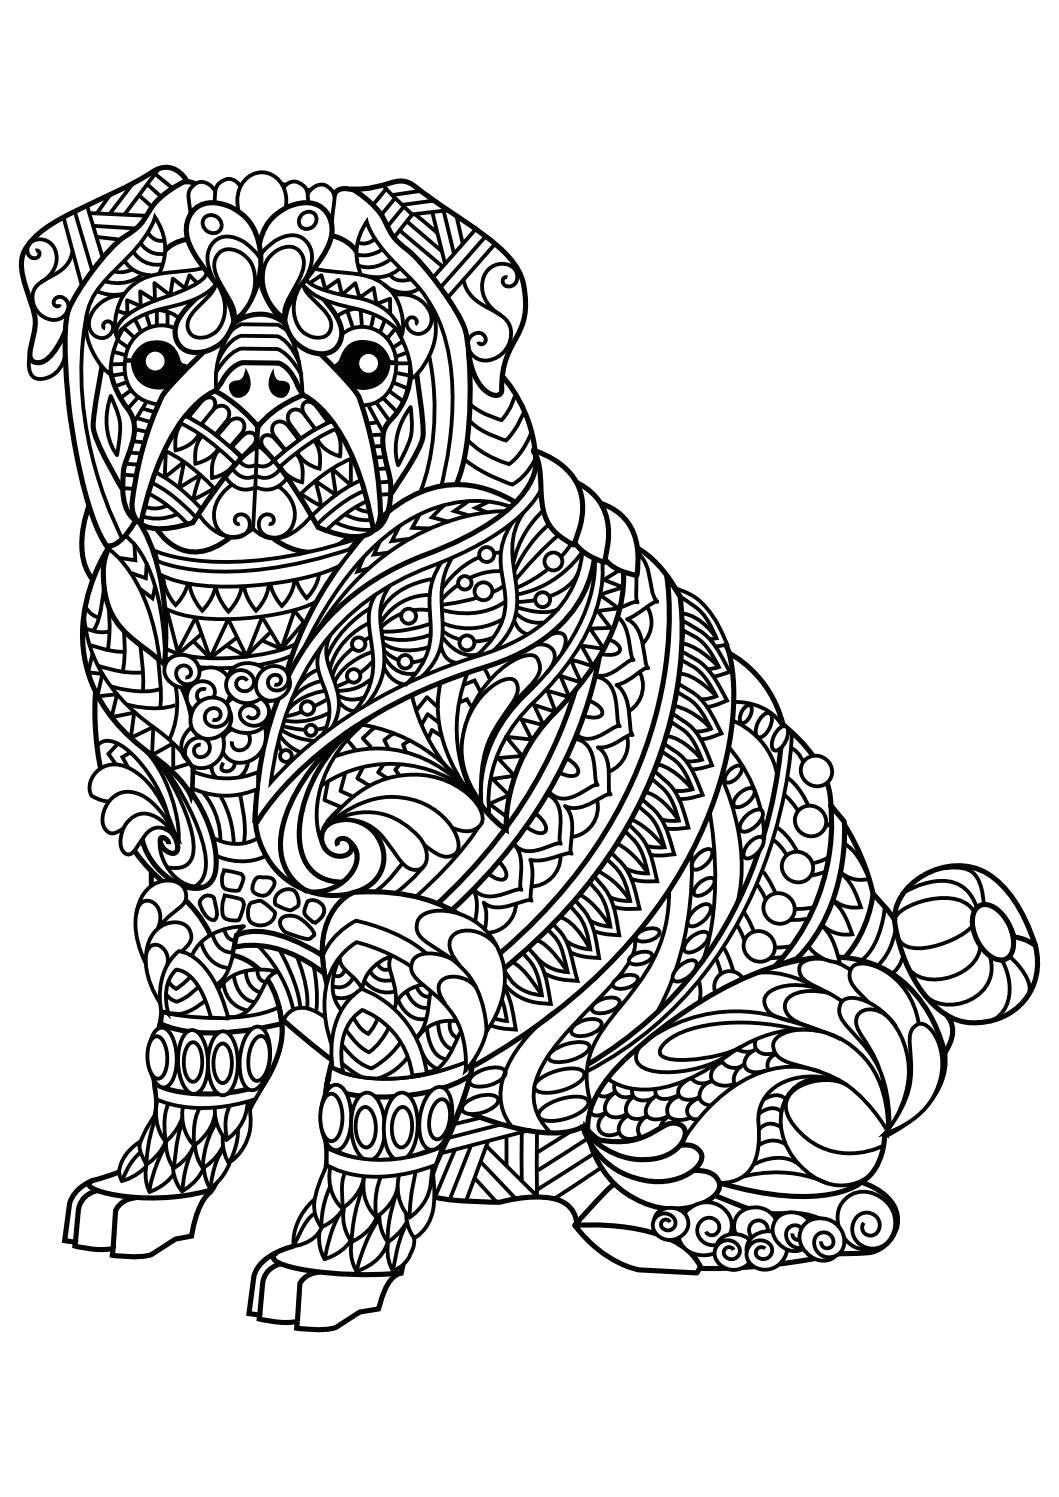 Dog Drawing to Color Animal Coloring Pages Pdf Coloring Animals Pinterest